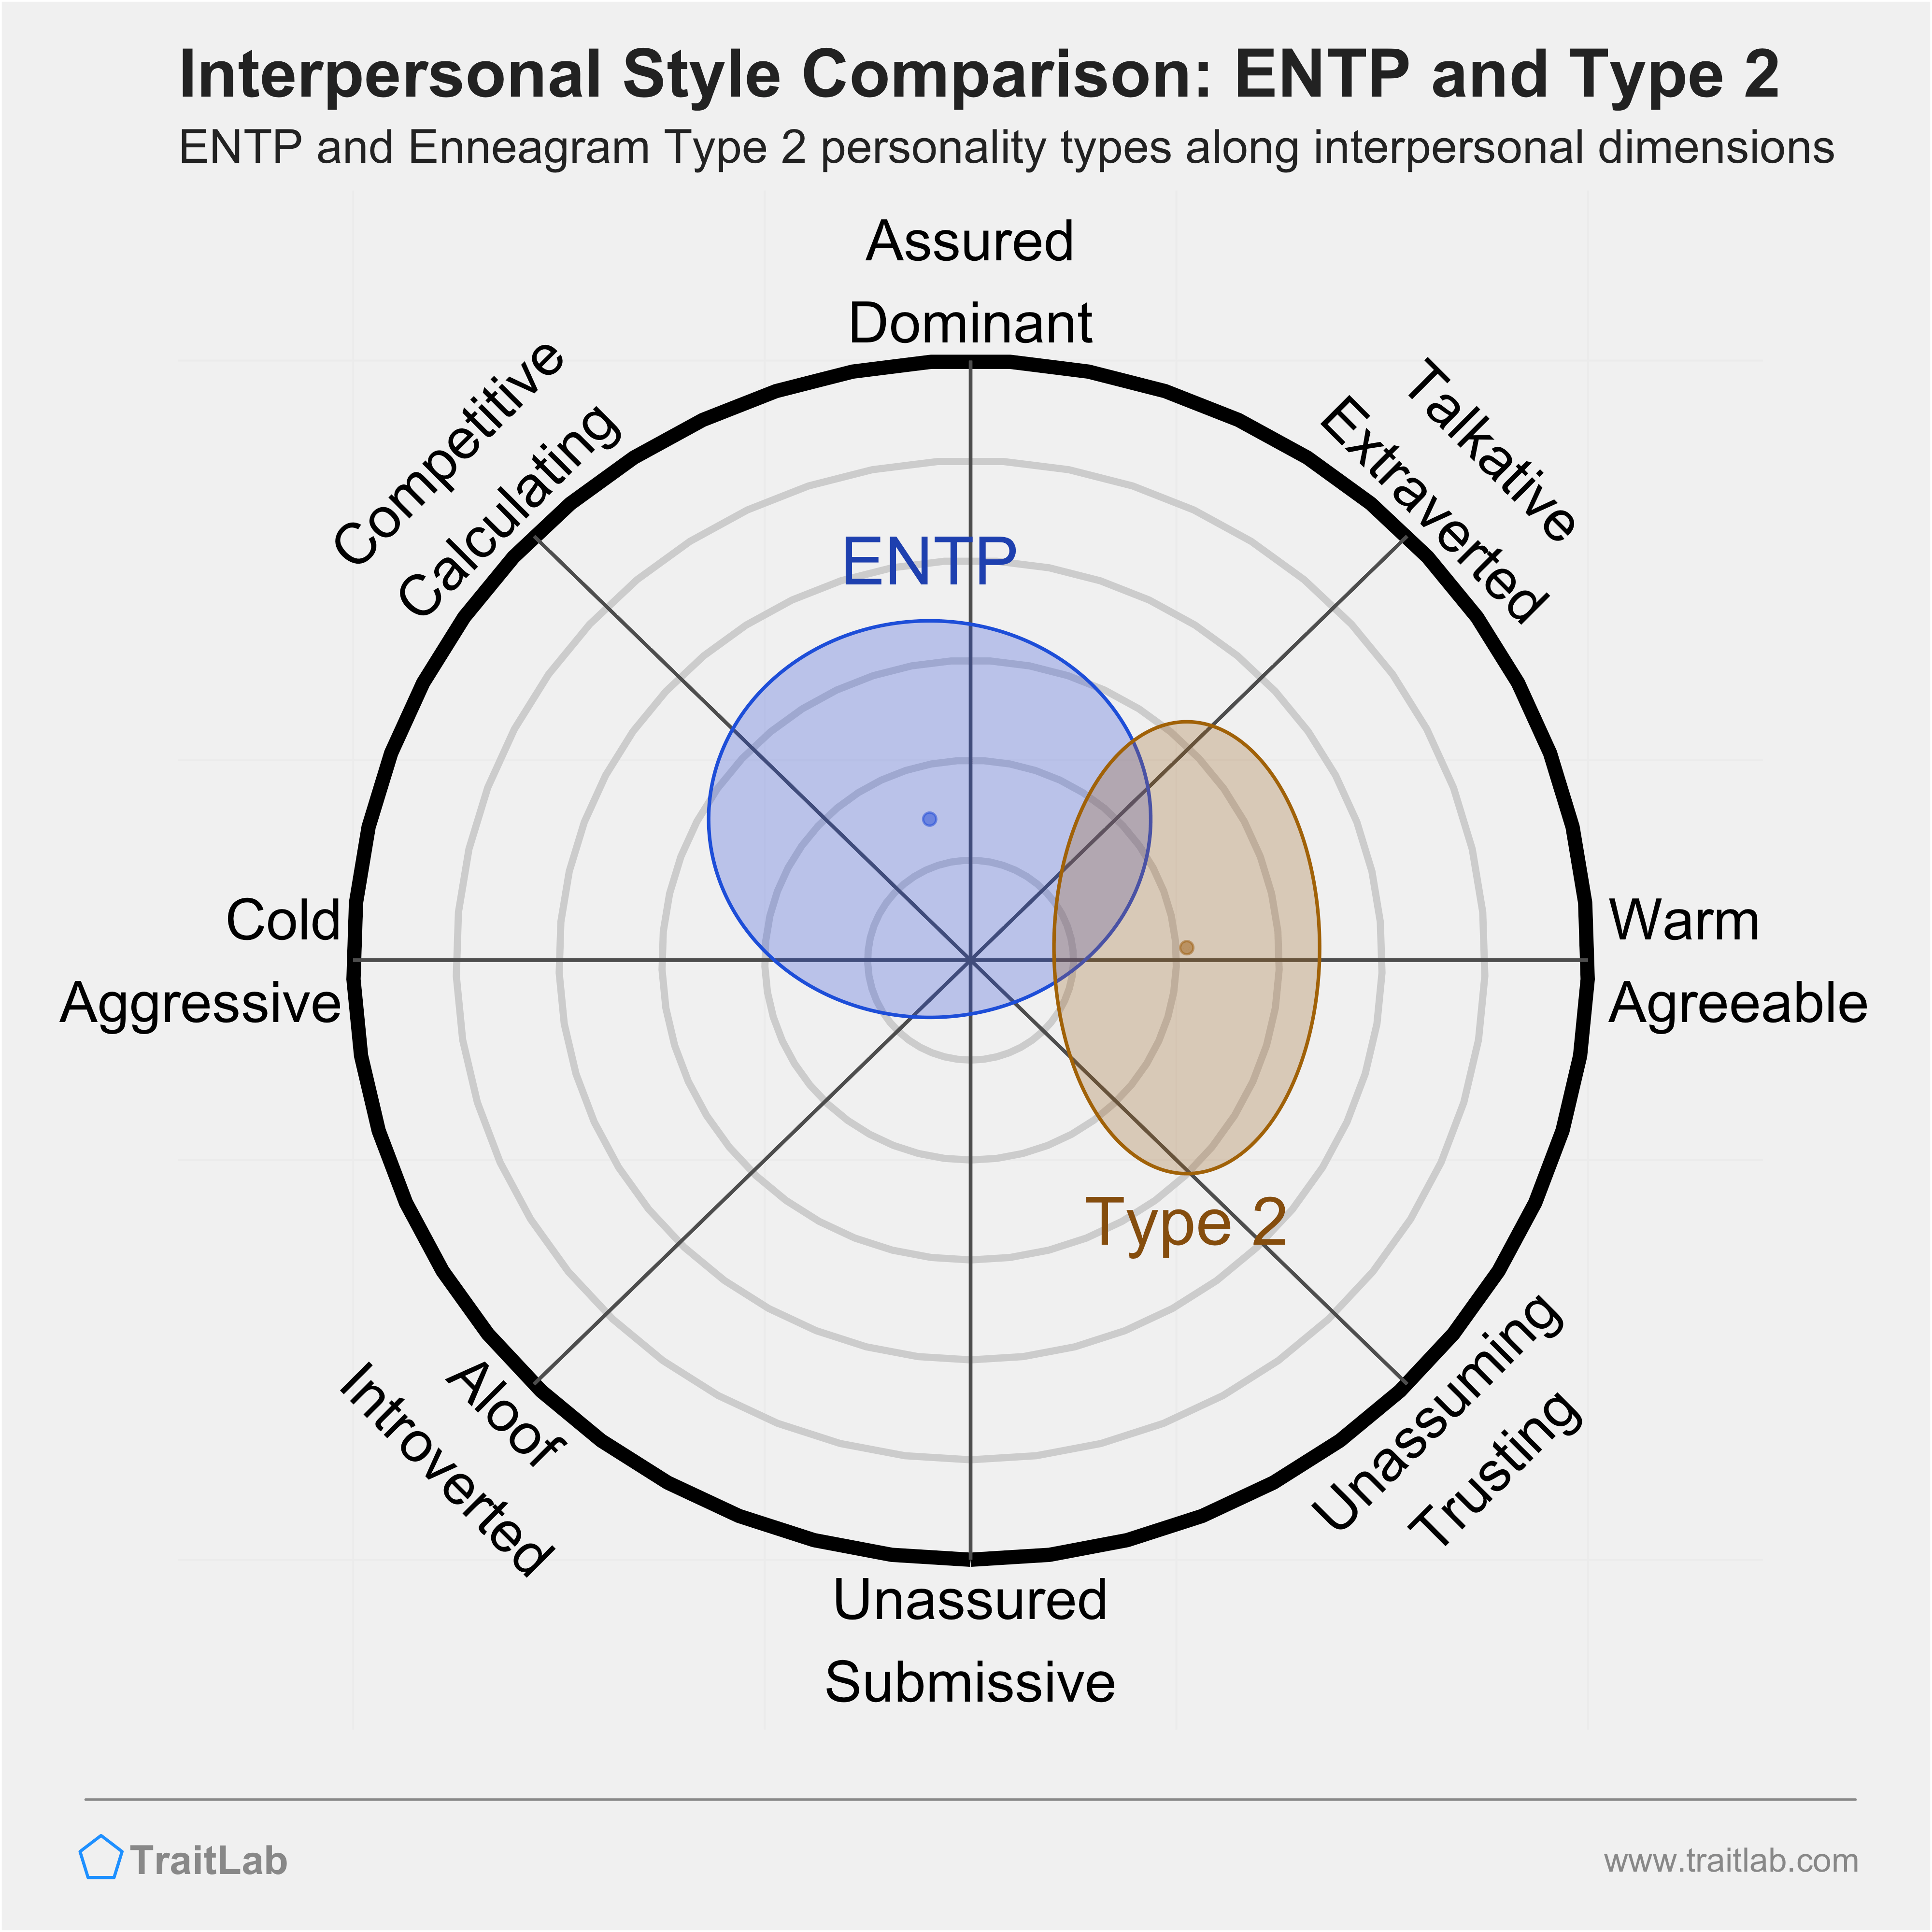 Enneagram ENTP and Type 2 comparison across interpersonal dimensions